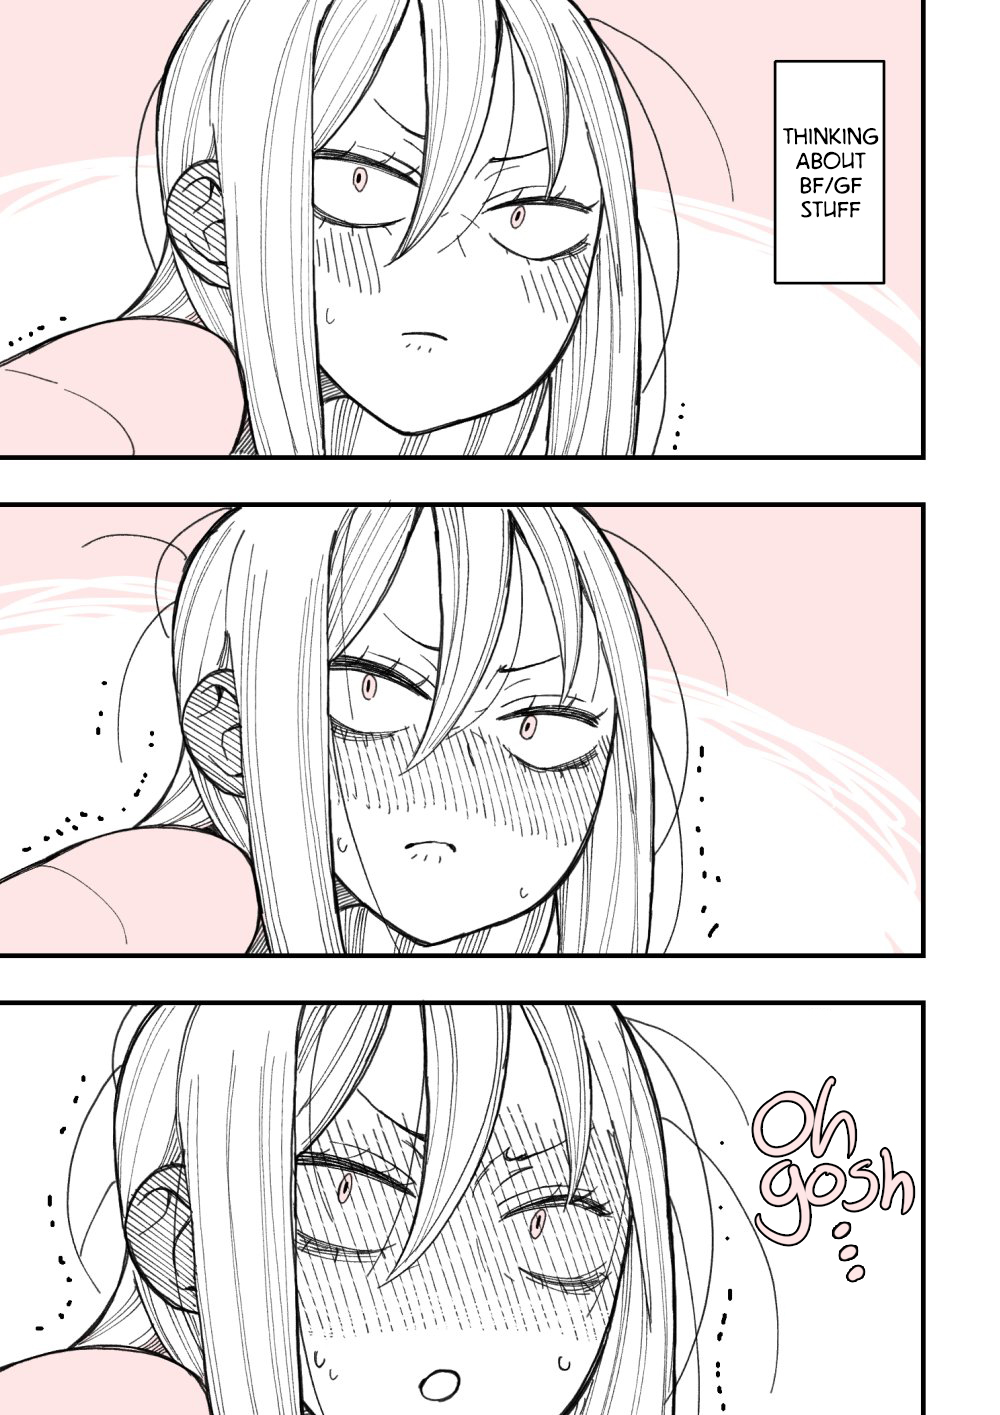 The Story of a Girl with Sanpaku Eyes Vol. 1 Ch. 19 Thinking about it